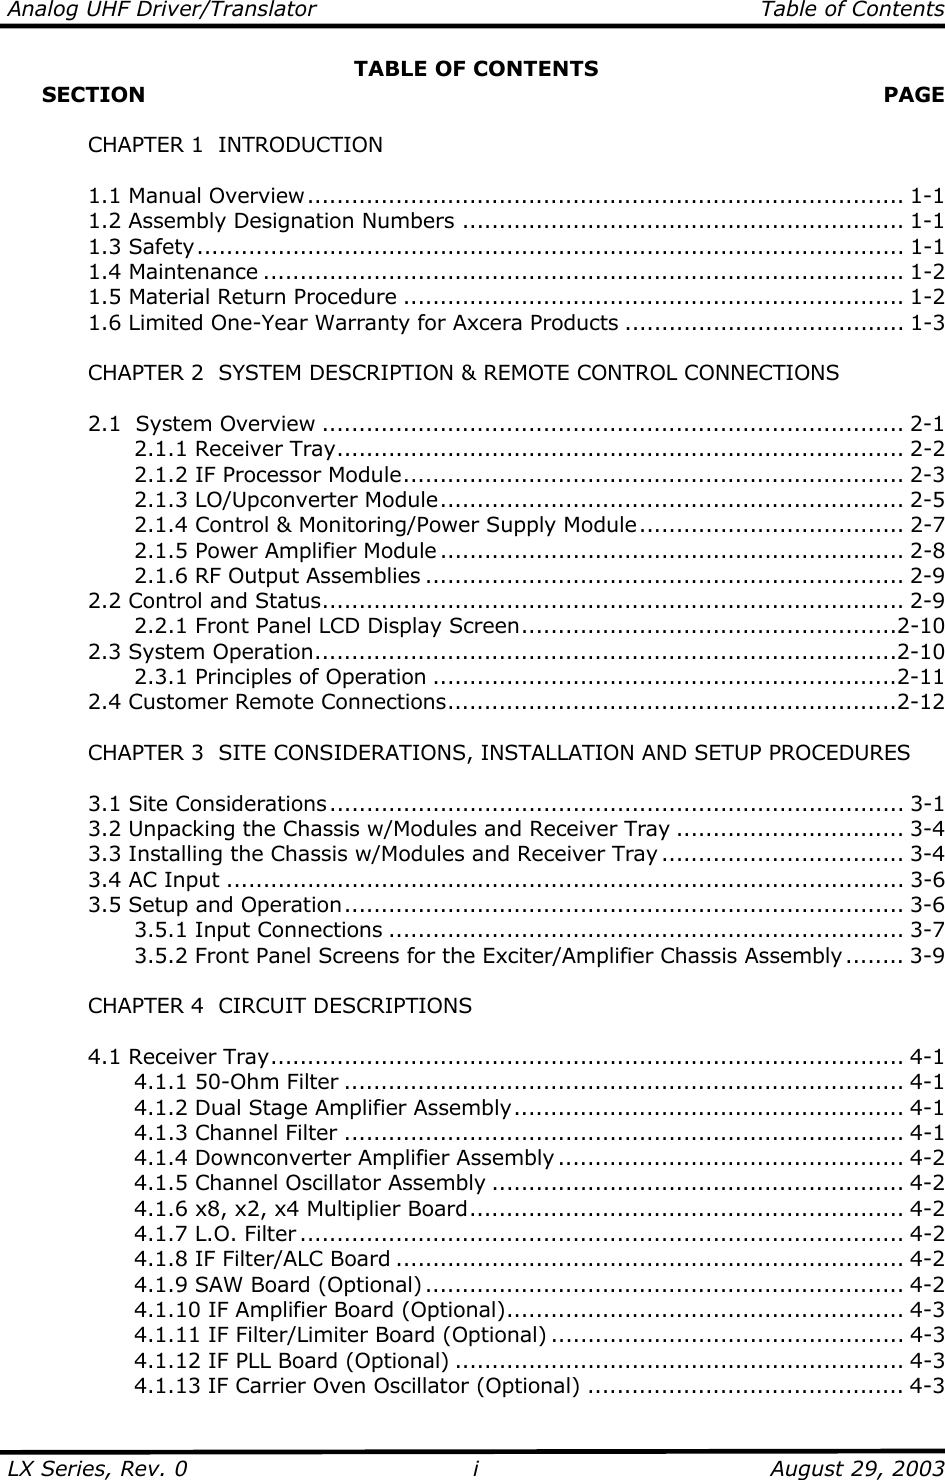 Analog UHF Driver/Translator   Table of Contents  LX Series, Rev. 0    August 29, 2003 iTABLE OF CONTENTS      SECTION   PAGE     CHAPTER 1  INTRODUCTION   1.1 Manual Overview................................................................................. 1-1   1.2 Assembly Designation Numbers ............................................................ 1-1  1.3 Safety................................................................................................ 1-1  1.4 Maintenance ....................................................................................... 1-2   1.5 Material Return Procedure .................................................................... 1-2   1.6 Limited One-Year Warranty for Axcera Products ...................................... 1-3    CHAPTER 2  SYSTEM DESCRIPTION &amp; REMOTE CONTROL CONNECTIONS    2.1  System Overview ............................................................................... 2-1   2.1.1 Receiver Tray............................................................................. 2-2     2.1.2 IF Processor Module.................................................................... 2-3   2.1.3 LO/Upconverter Module............................................................... 2-5     2.1.4 Control &amp; Monitoring/Power Supply Module.................................... 2-7     2.1.5 Power Amplifier Module ............................................................... 2-8     2.1.6 RF Output Assemblies ................................................................. 2-9  2.2 Control and Status............................................................................... 2-9     2.2.1 Front Panel LCD Display Screen...................................................2-10  2.3 System Operation...............................................................................2-10   2.3.1 Principles of Operation ...............................................................2-11  2.4 Customer Remote Connections.............................................................2-12      CHAPTER 3  SITE CONSIDERATIONS, INSTALLATION AND SETUP PROCEDURES     3.1 Site Considerations.............................................................................. 3-1   3.2 Unpacking the Chassis w/Modules and Receiver Tray ............................... 3-4   3.3 Installing the Chassis w/Modules and Receiver Tray ................................. 3-4   3.4 AC Input ............................................................................................ 3-6  3.5 Setup and Operation............................................................................ 3-6   3.5.1 Input Connections ...................................................................... 3-7     3.5.2 Front Panel Screens for the Exciter/Amplifier Chassis Assembly ........ 3-9    CHAPTER 4  CIRCUIT DESCRIPTIONS   4.1 Receiver Tray...................................................................................... 4-1   4.1.1 50-Ohm Filter ............................................................................ 4-1     4.1.2 Dual Stage Amplifier Assembly..................................................... 4-1     4.1.3 Channel Filter ............................................................................ 4-1   4.1.4 Downconverter Amplifier Assembly ............................................... 4-2     4.1.5 Channel Oscillator Assembly ........................................................ 4-2     4.1.6 x8, x2, x4 Multiplier Board........................................................... 4-2   4.1.7 L.O. Filter .................................................................................. 4-2     4.1.8 IF Filter/ALC Board ..................................................................... 4-2   4.1.9 SAW Board (Optional) ................................................................. 4-2     4.1.10 IF Amplifier Board (Optional)...................................................... 4-3     4.1.11 IF Filter/Limiter Board (Optional) ................................................ 4-3     4.1.12 IF PLL Board (Optional) ............................................................. 4-3     4.1.13 IF Carrier Oven Oscillator (Optional) ........................................... 4-3 